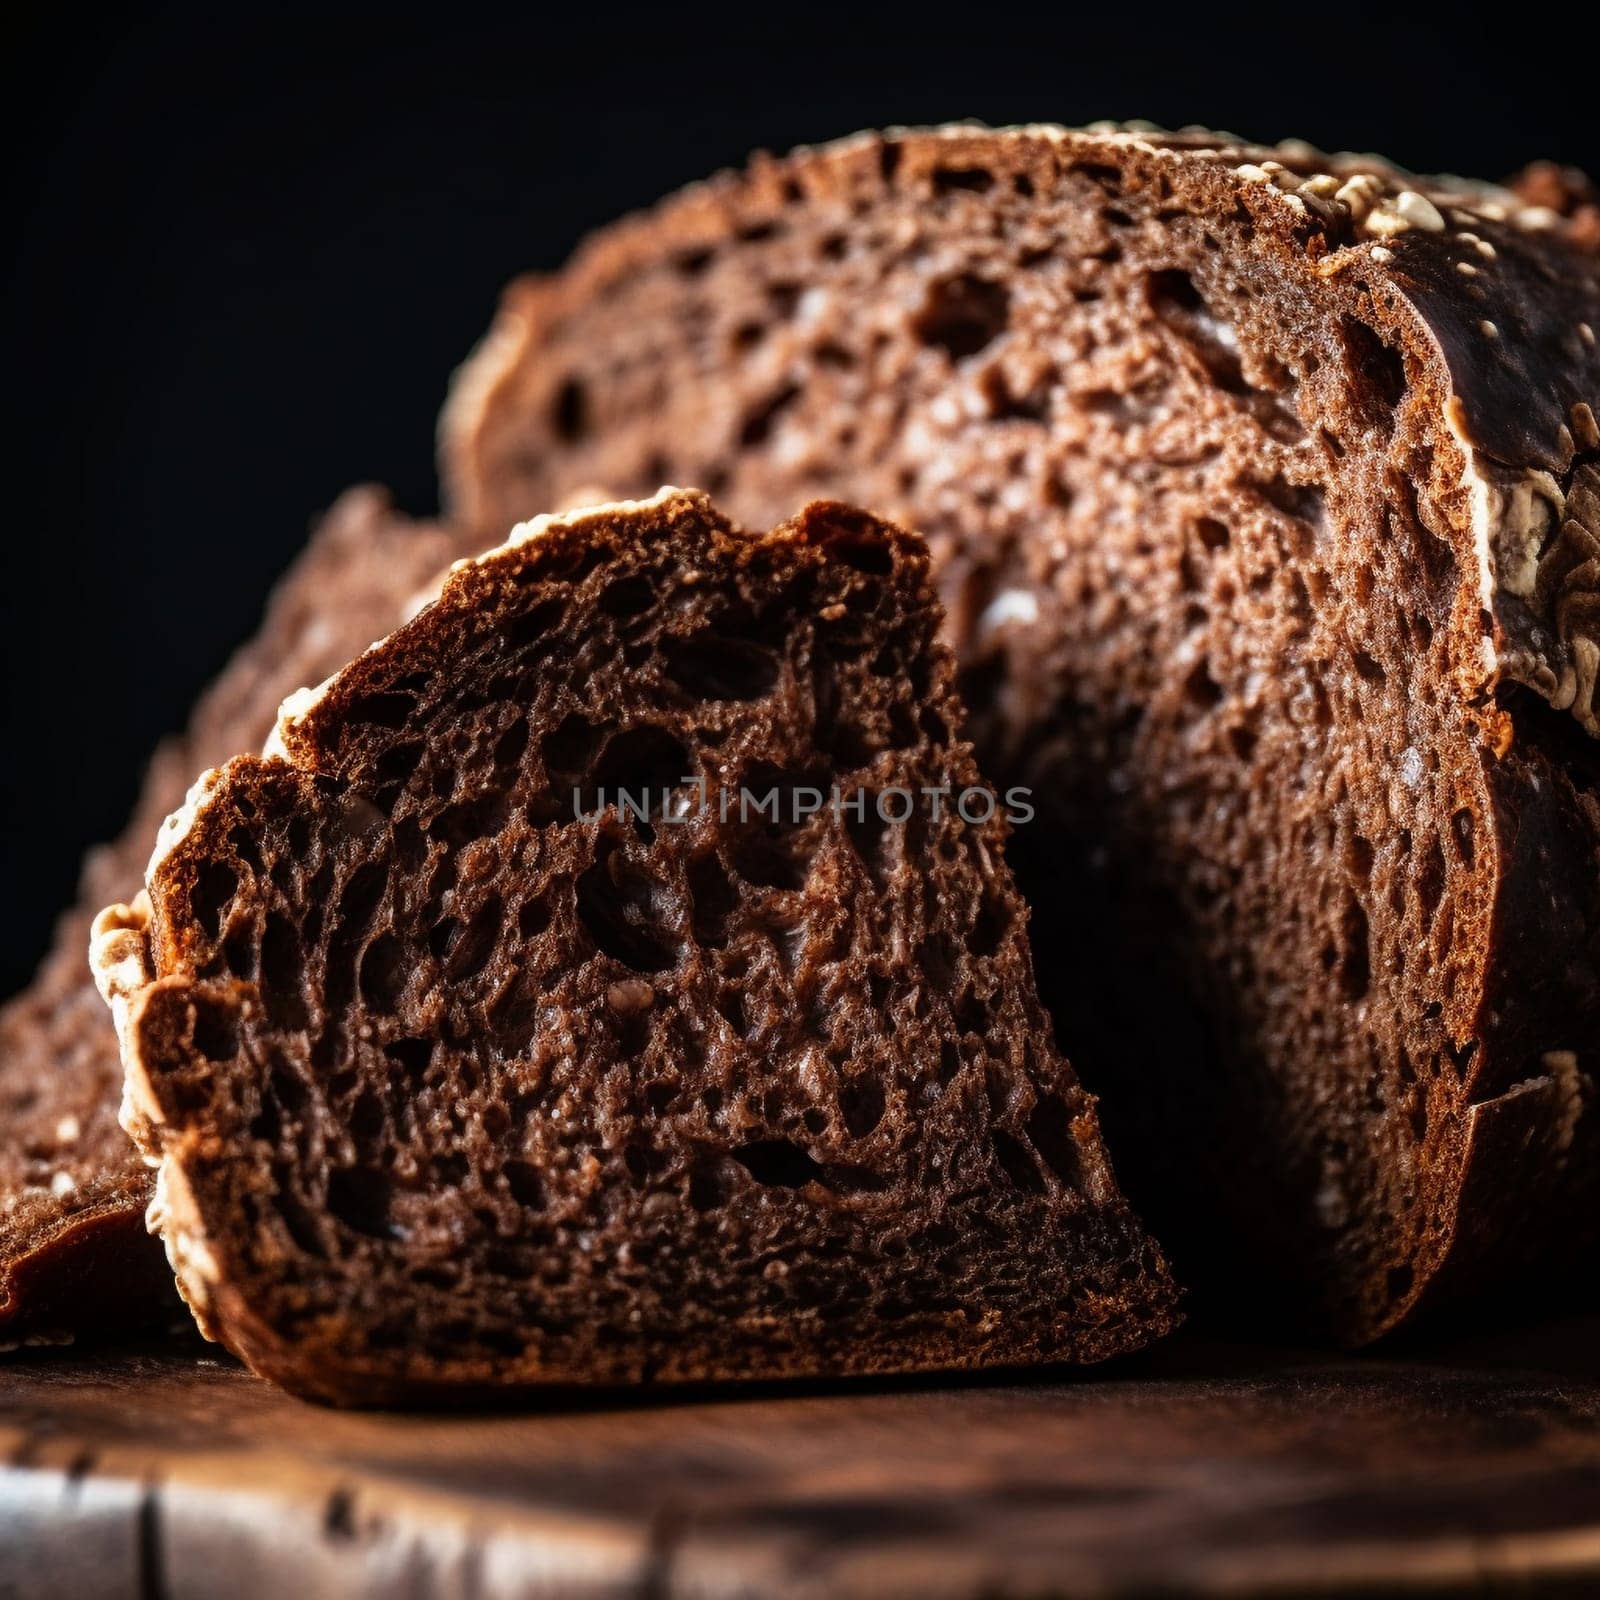 This close-up shot captures the rustic and wholesome flavors of Latvian Rye Bread, a dark and dense bread with a rich and earthy flavor and a chewy texture that's perfect for soaking up butter or spreads. In this image, the Rye Bread is served with a side of cheese, adding to the savory taste. The simple and minimalistic indoor scene in the background adds to the rustic atmosphere, with cool colors and soft lighting enhancing the mood. The cool, diffused lighting and use of a reflector highlight the texture and colors of the bread, creating a wholesome and rustic mood.